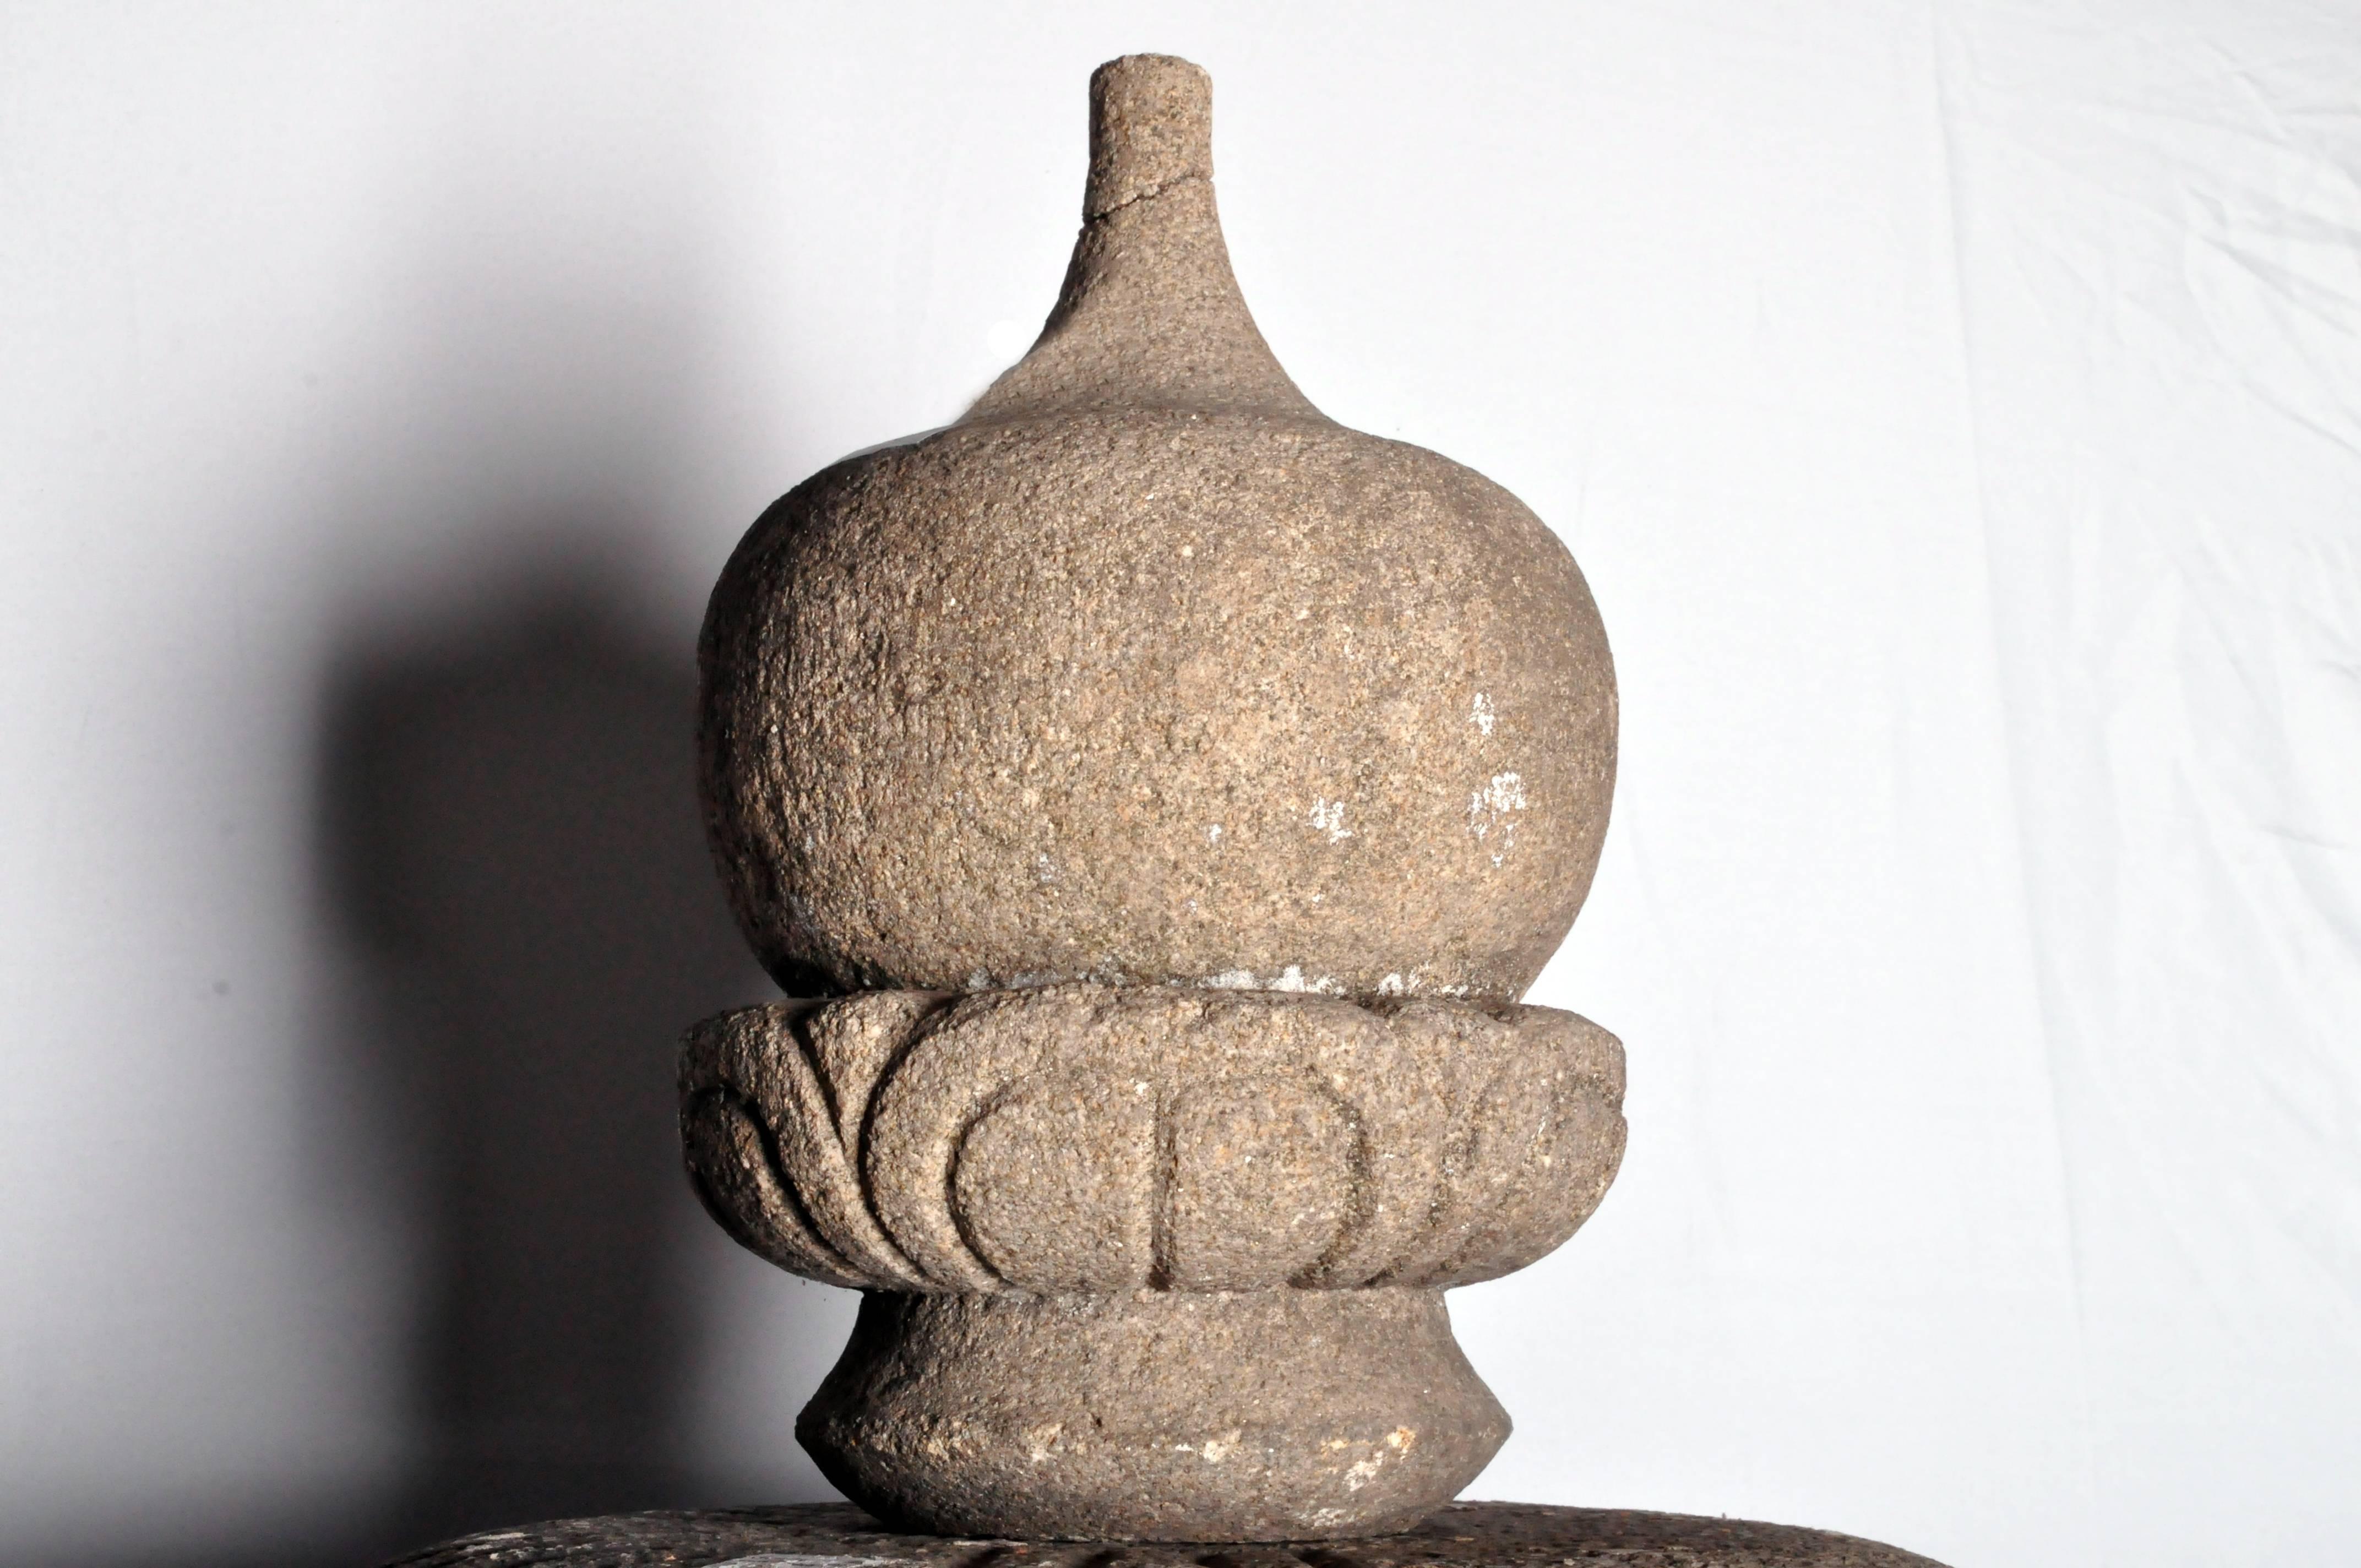 Japanese stone lanterns were first used in ancient Shinto shrines where they served as votive lights. In the 16th century Japanese tea masters included the lanterns in Buddhist tea gardens as a means to light pathways. Solid yet elegant, these